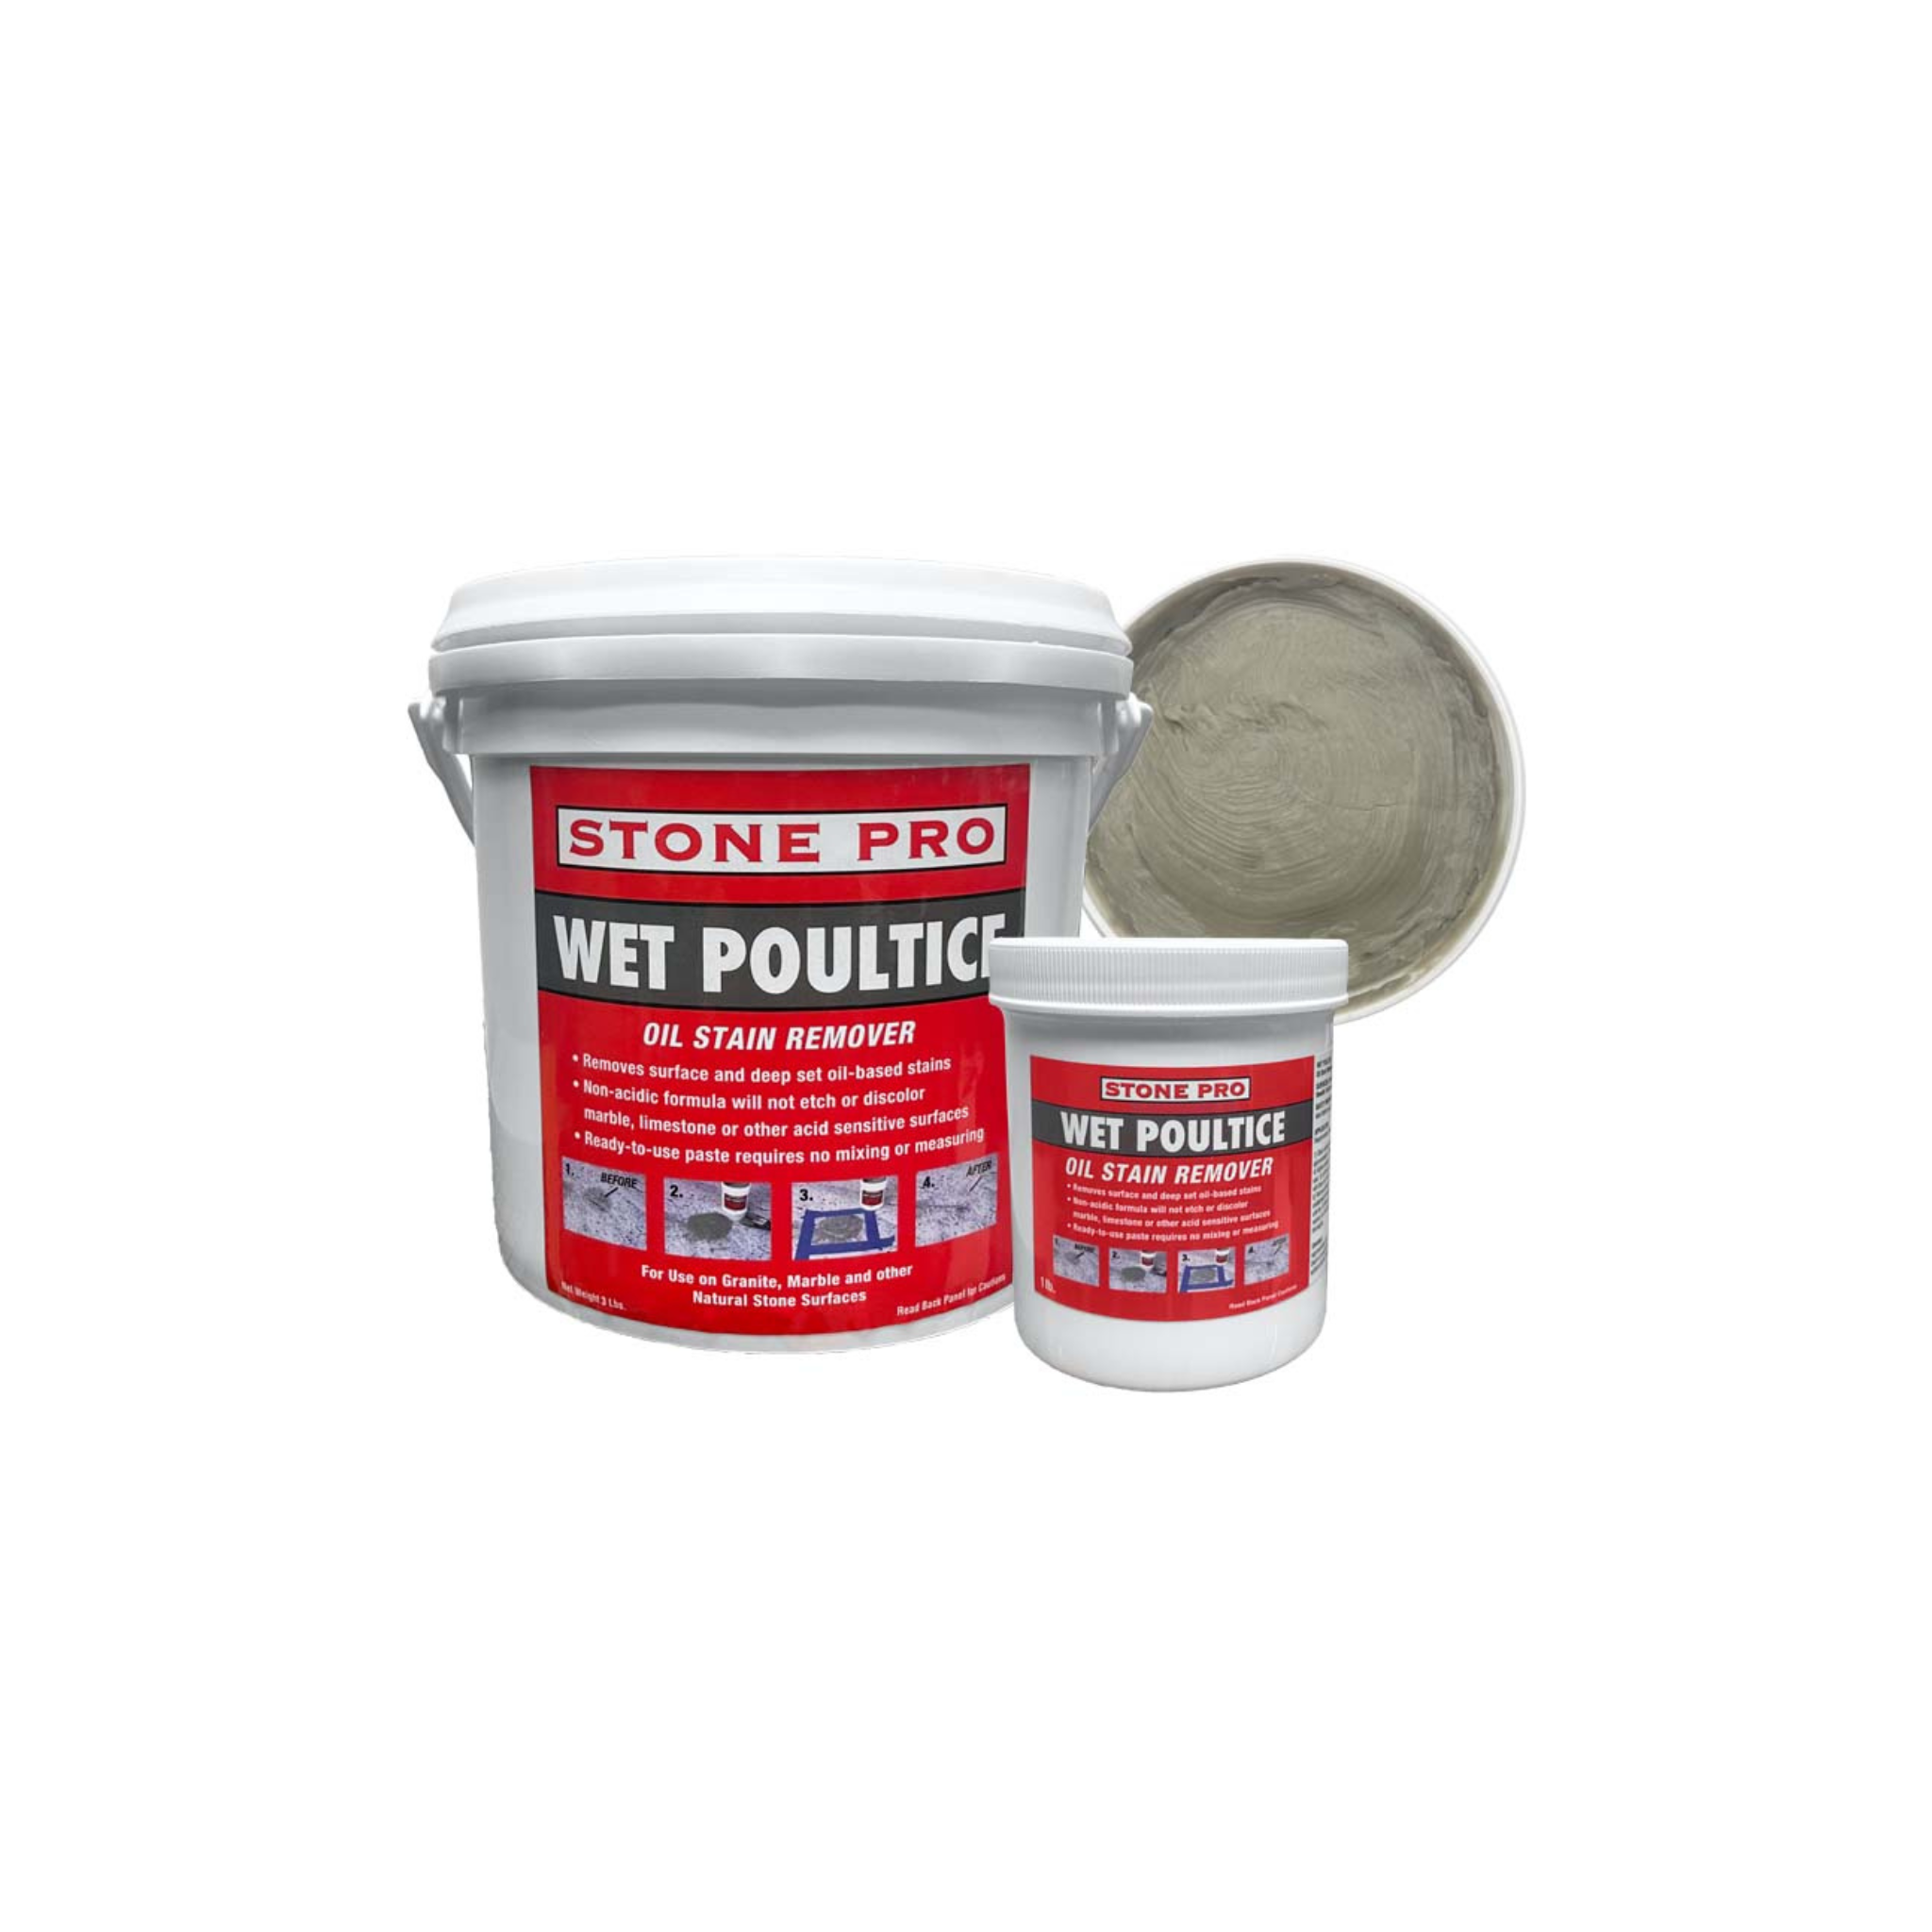 Stone Pro Wet Poultice, 1 lb - Direct Stone Tool Supply, Inc